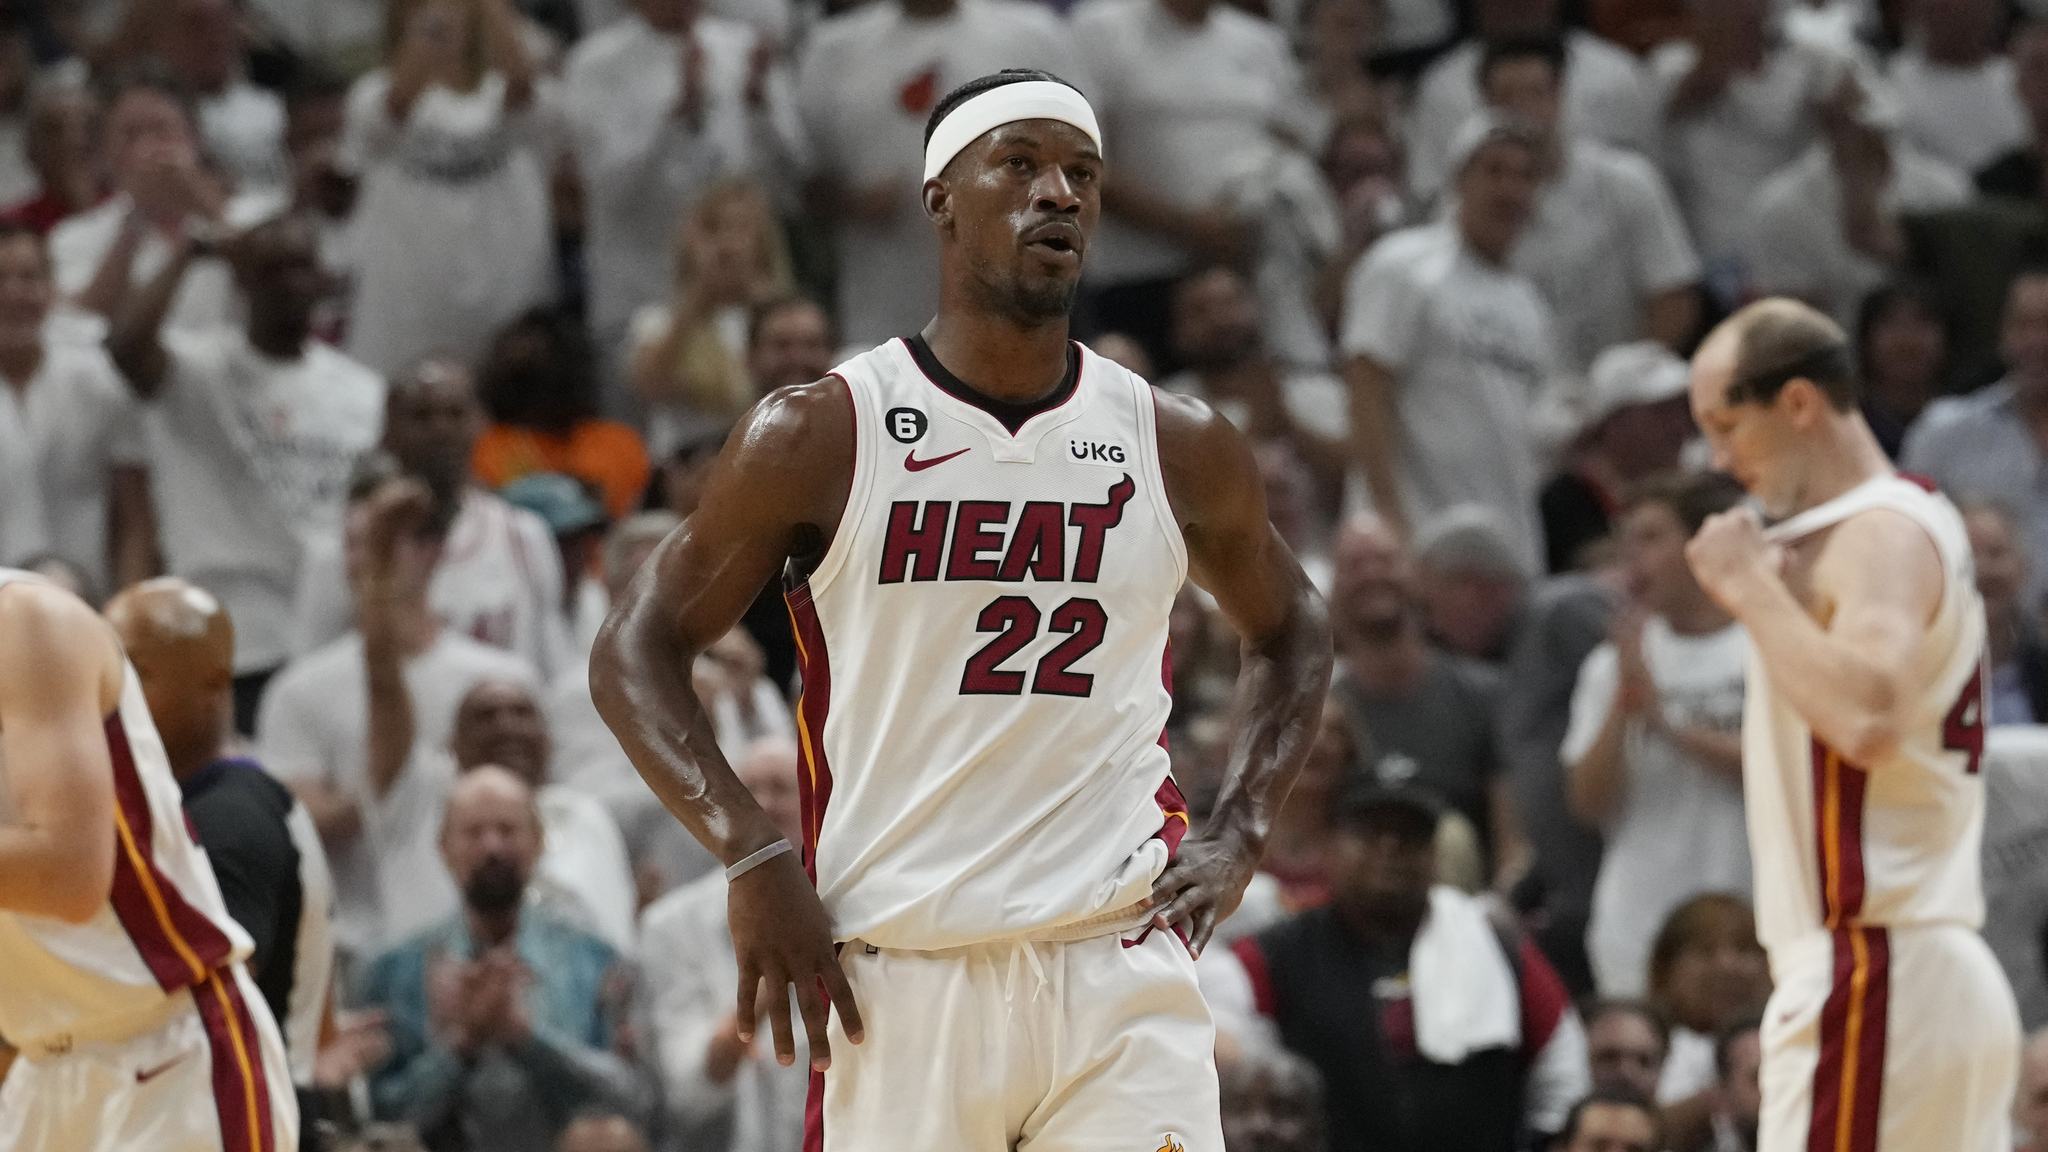 Miami Heat fans were waiting for a playoff performance from Jimmy, but it looks like it may never come.